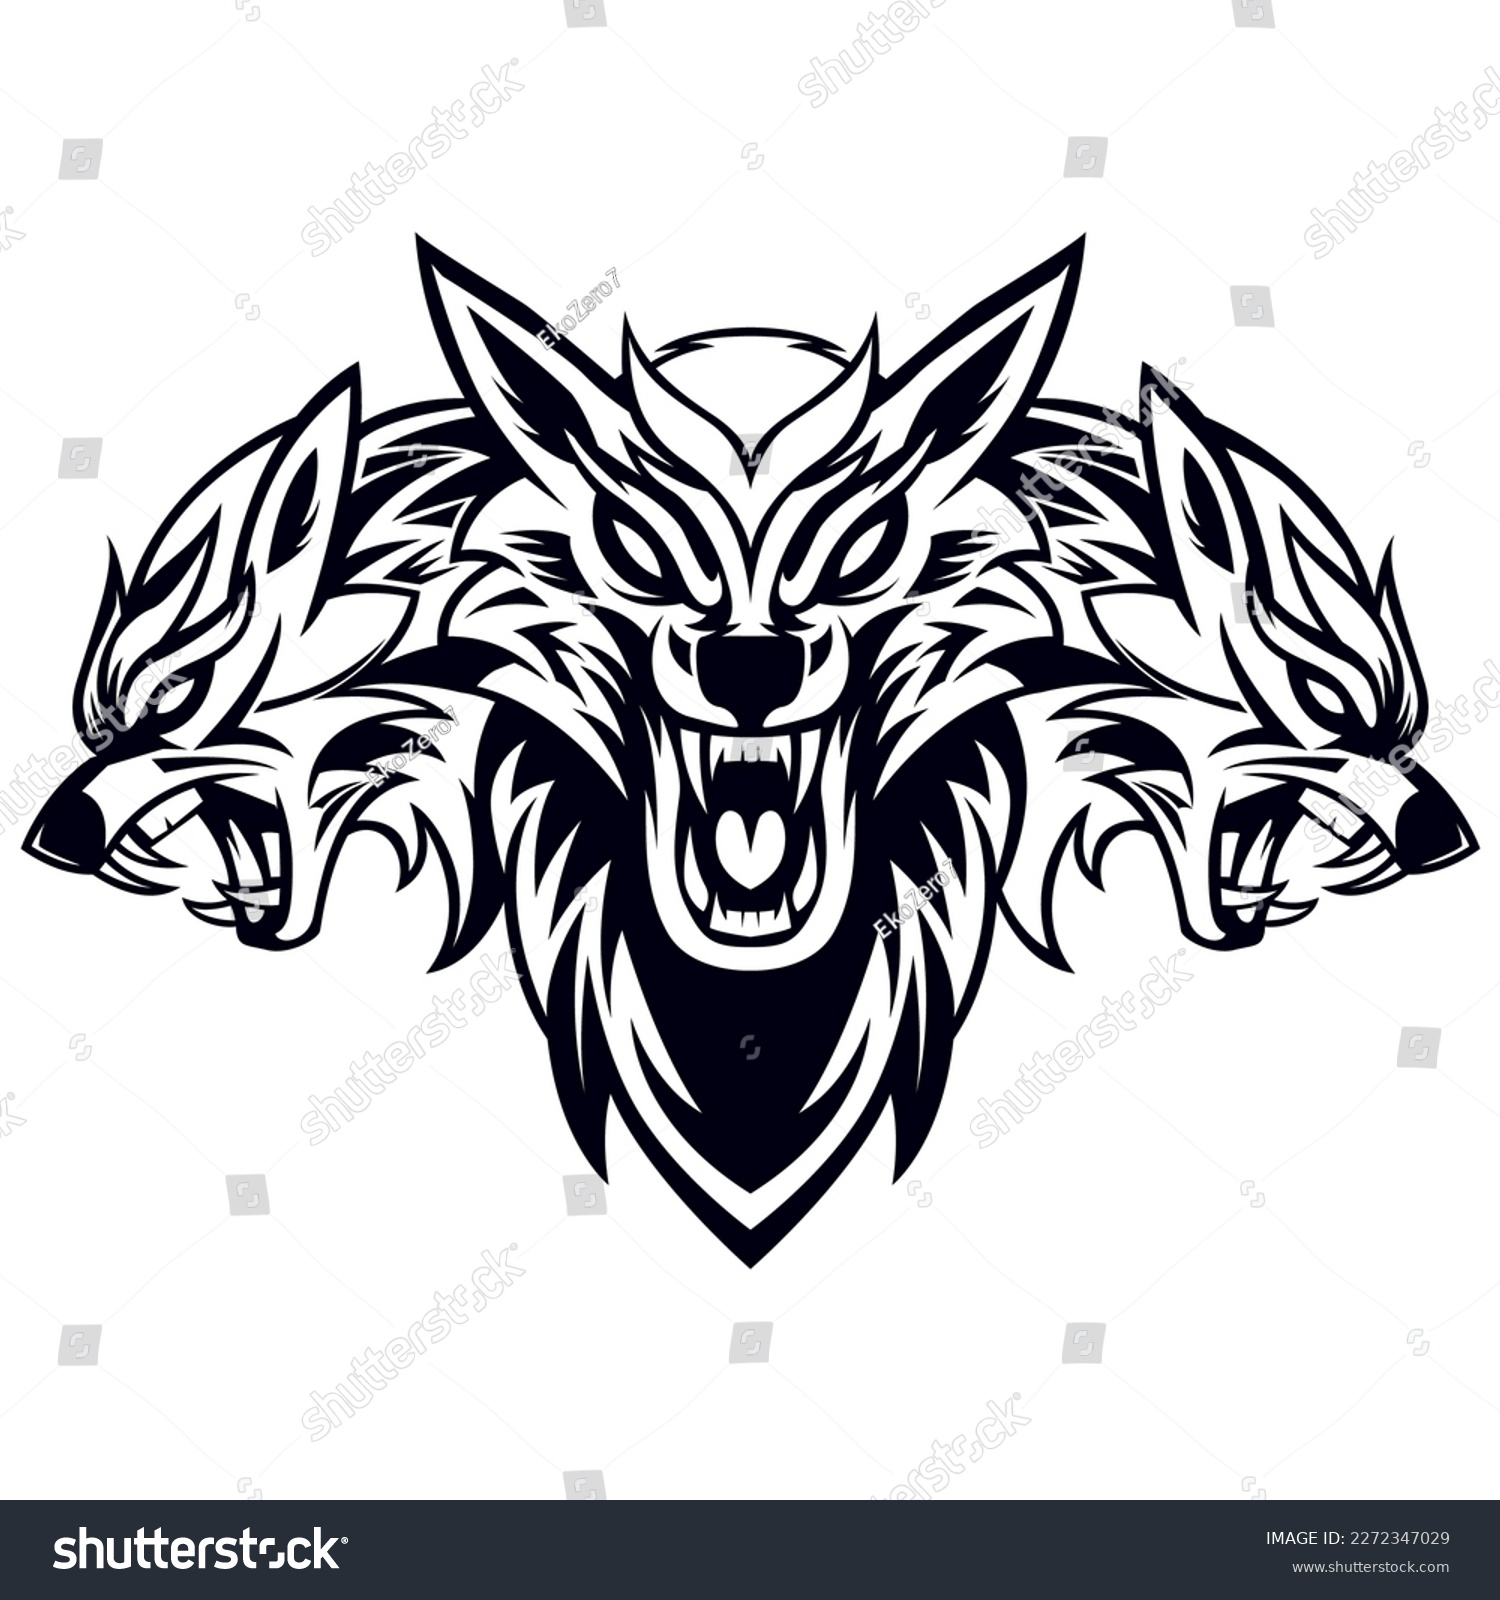 SVG of Cerberus Wolf Drawing Vector Black And White Isolated on White Background Design Template svg